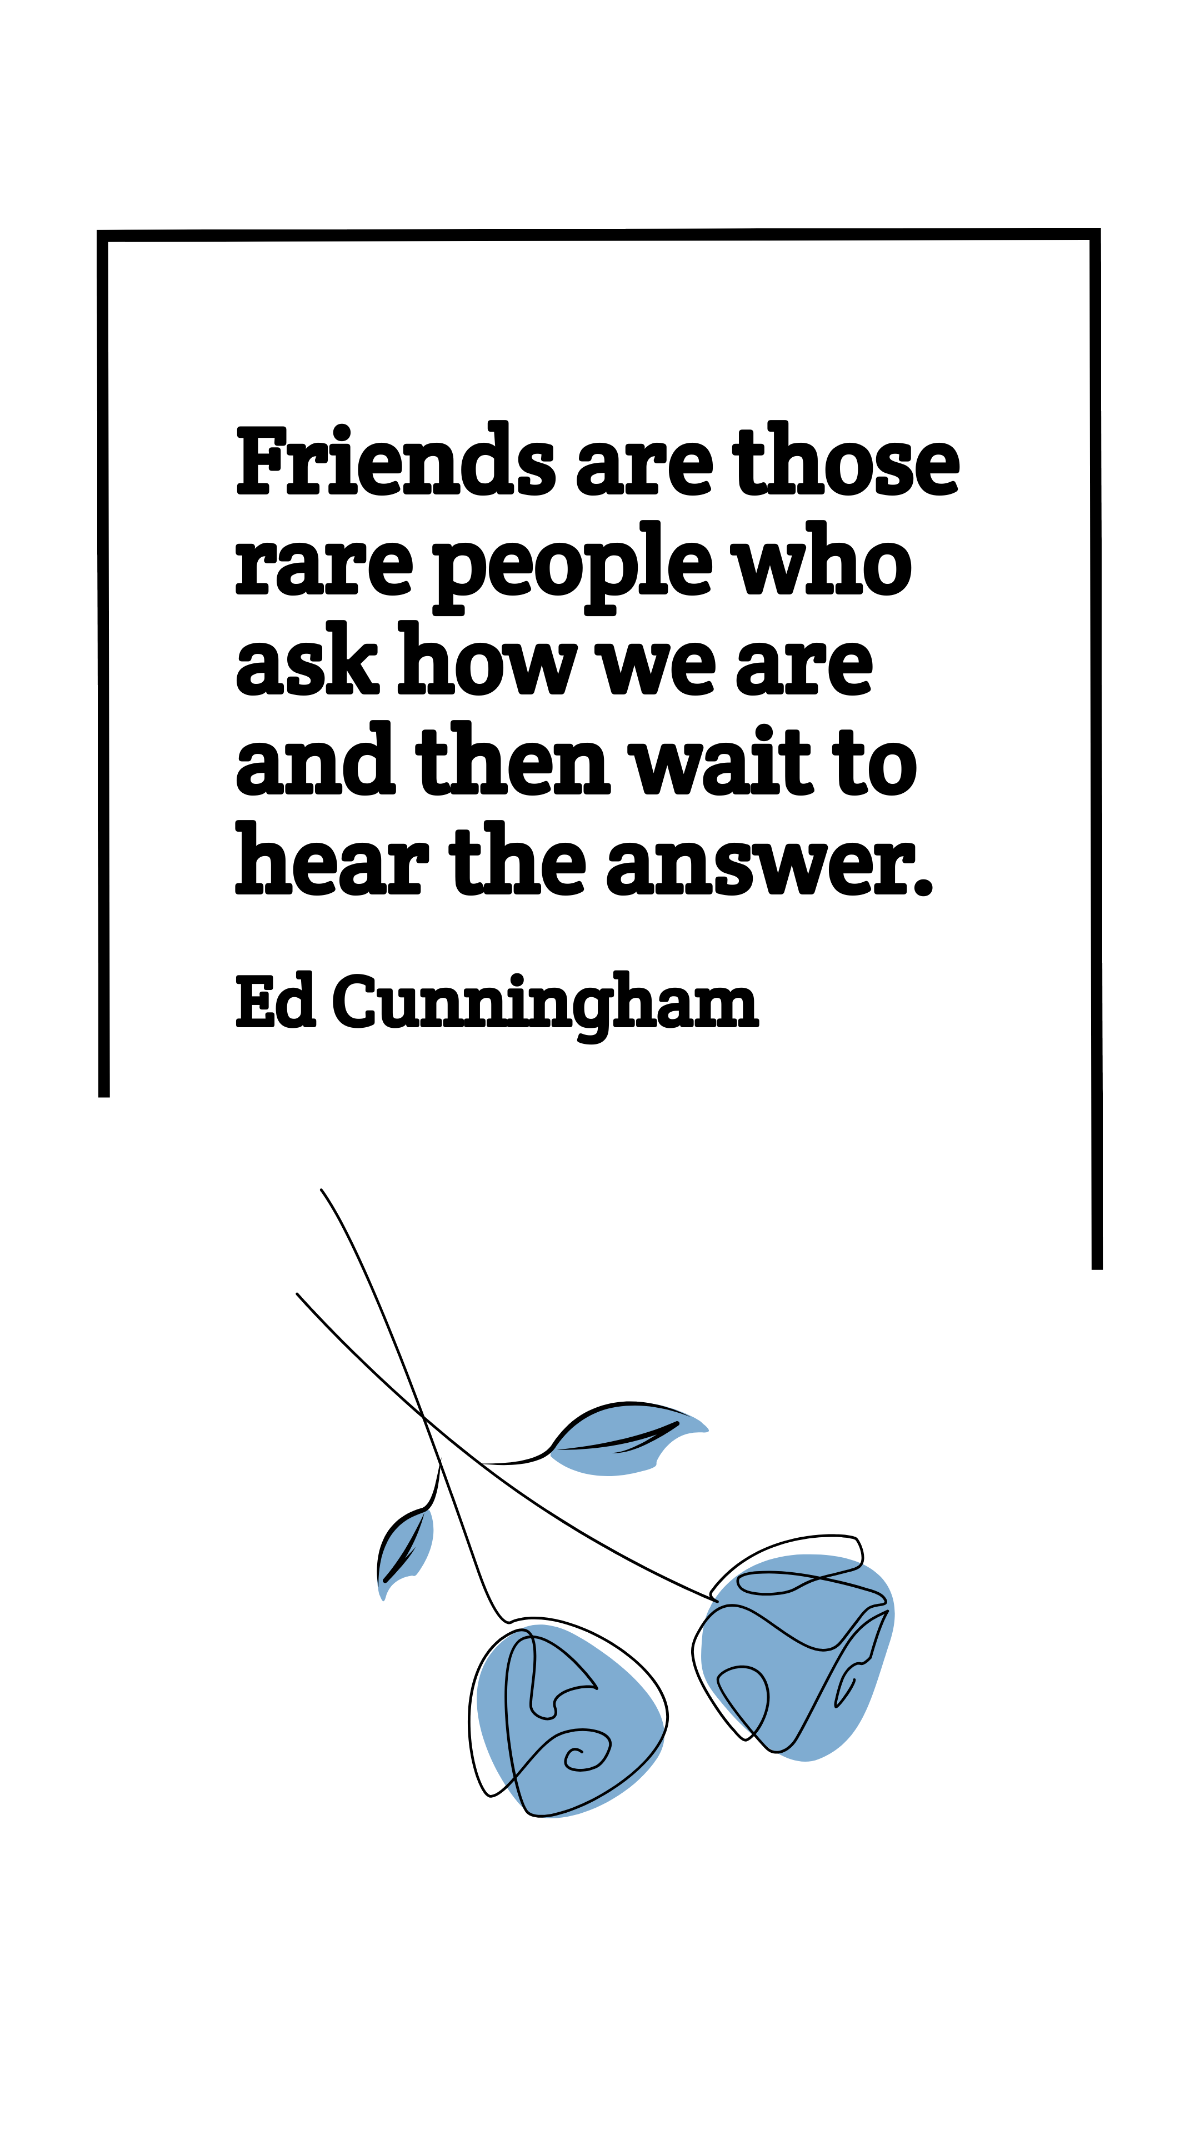 Ed Cunningham - Friends are those rare people who ask how we are and then wait to hear the answer. Template